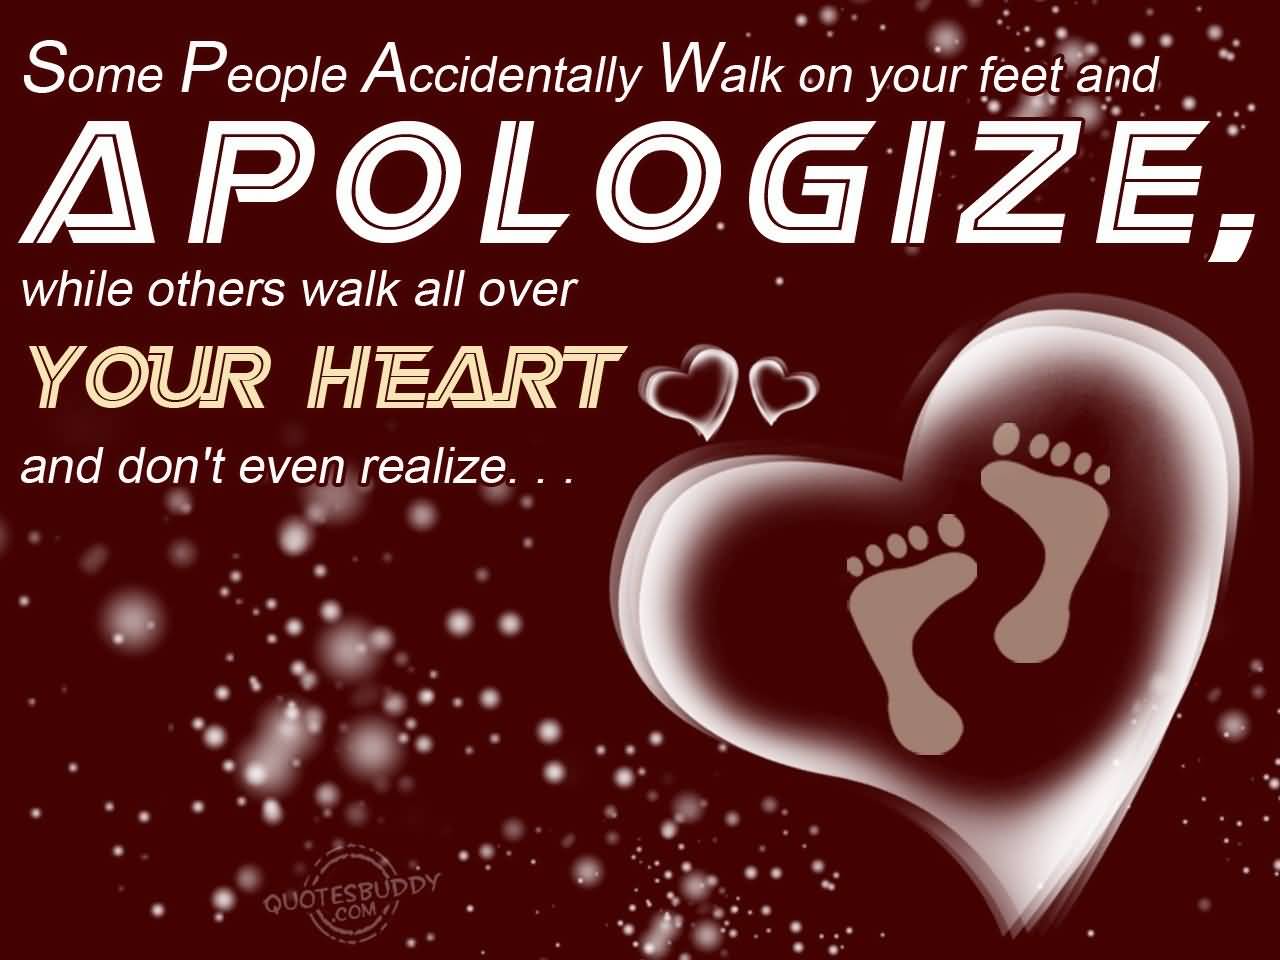 Some people accidentally walk on your feet and apologize, while others walk all over your heart and don't even realize.